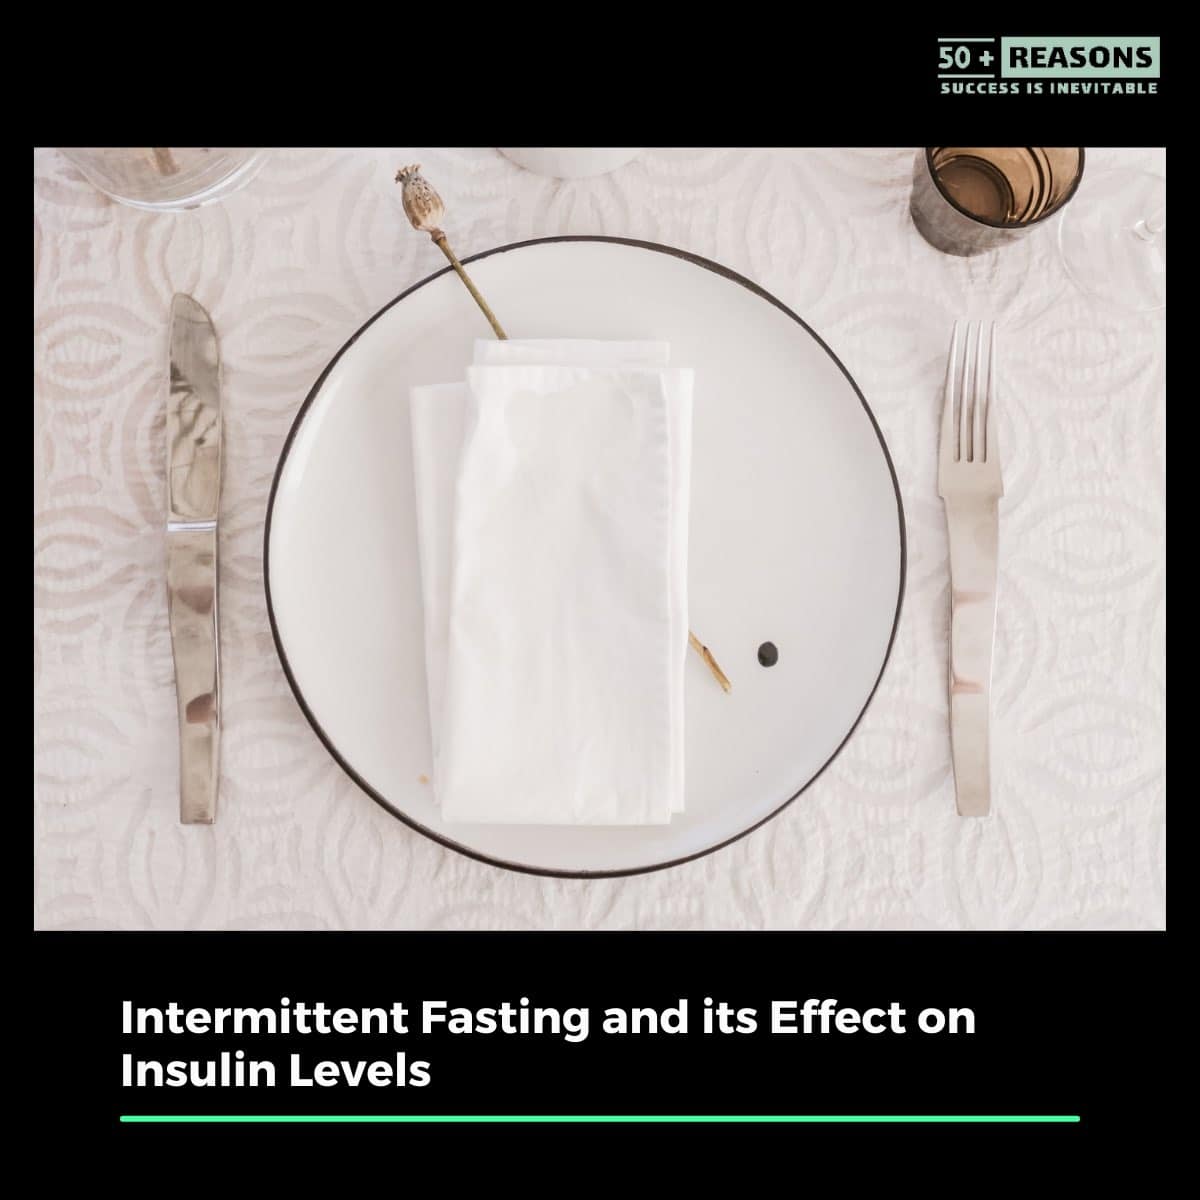 The Science of Intermittent Fasting and its Effect on Insulin Levels